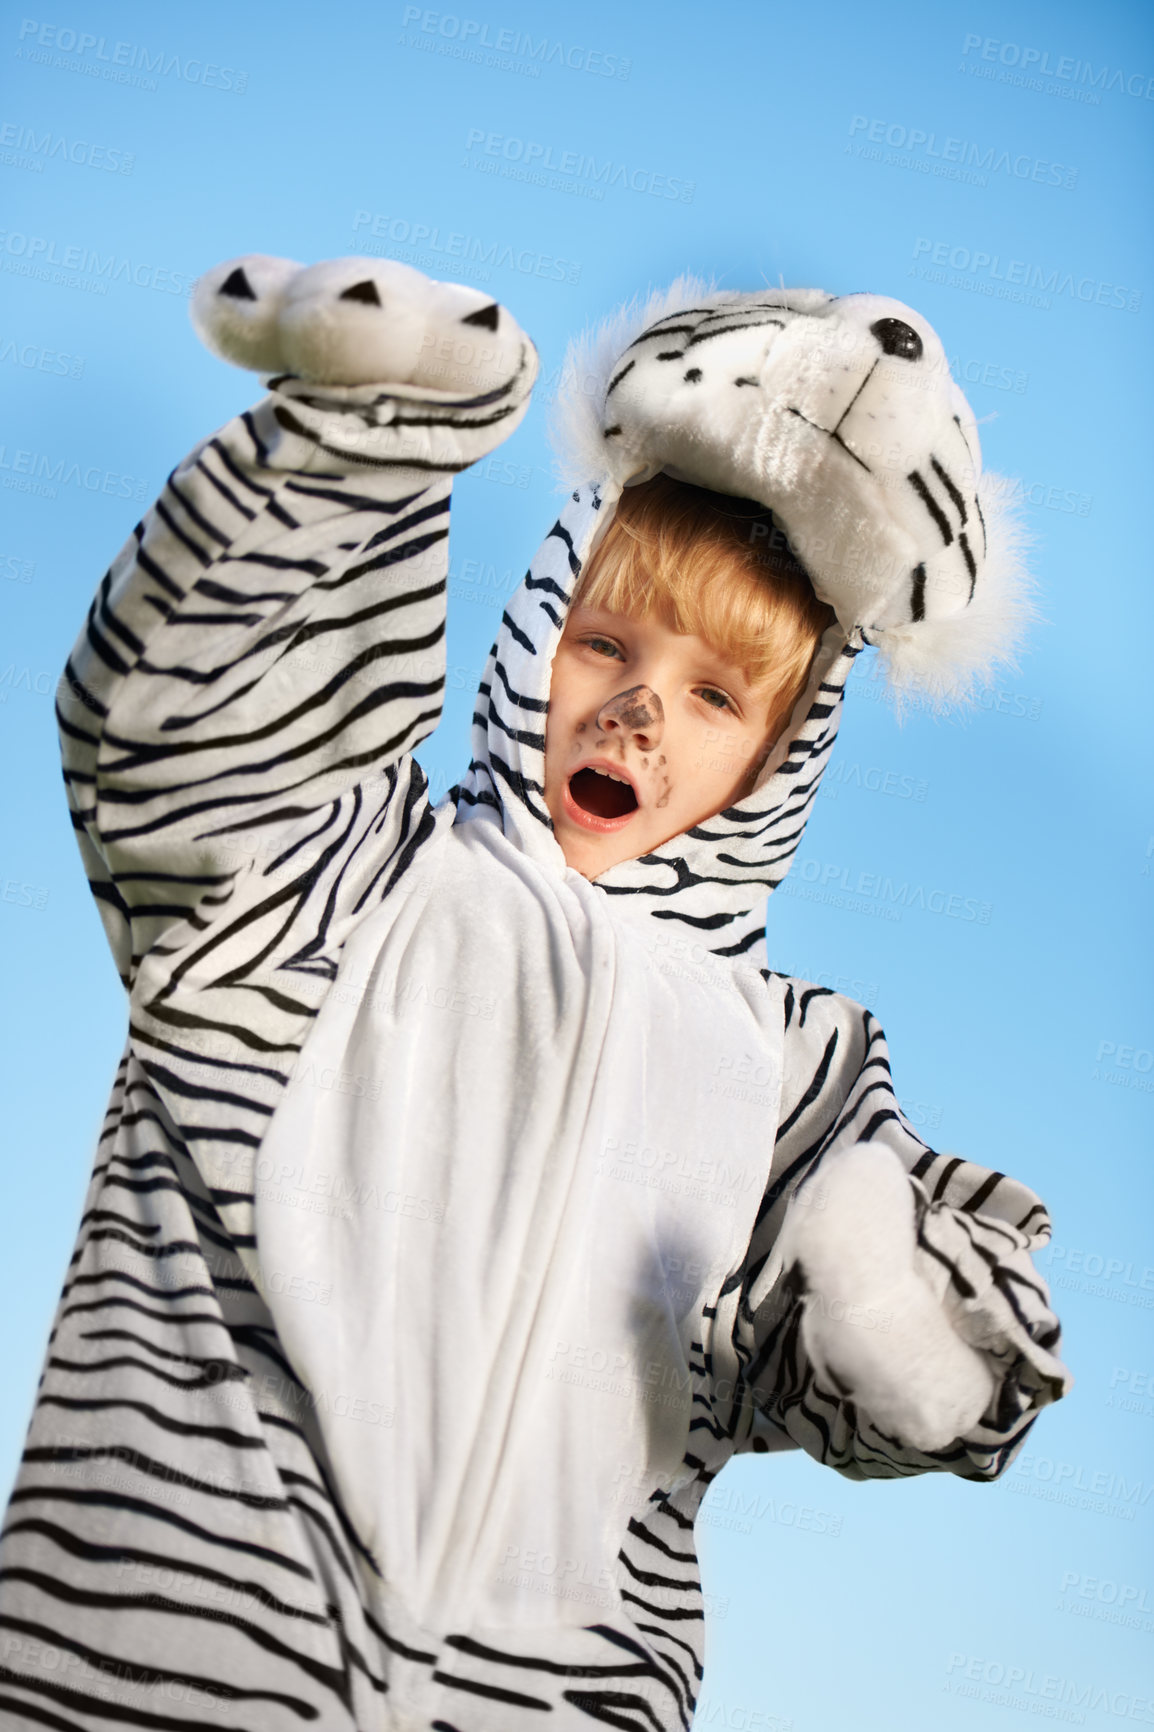 Buy stock photo Child, tiger costume and excited for fun fashion and style on a blue studio background. Cheerful, little boy and animal clothing while playing during halloween tradition and dressing while adorable